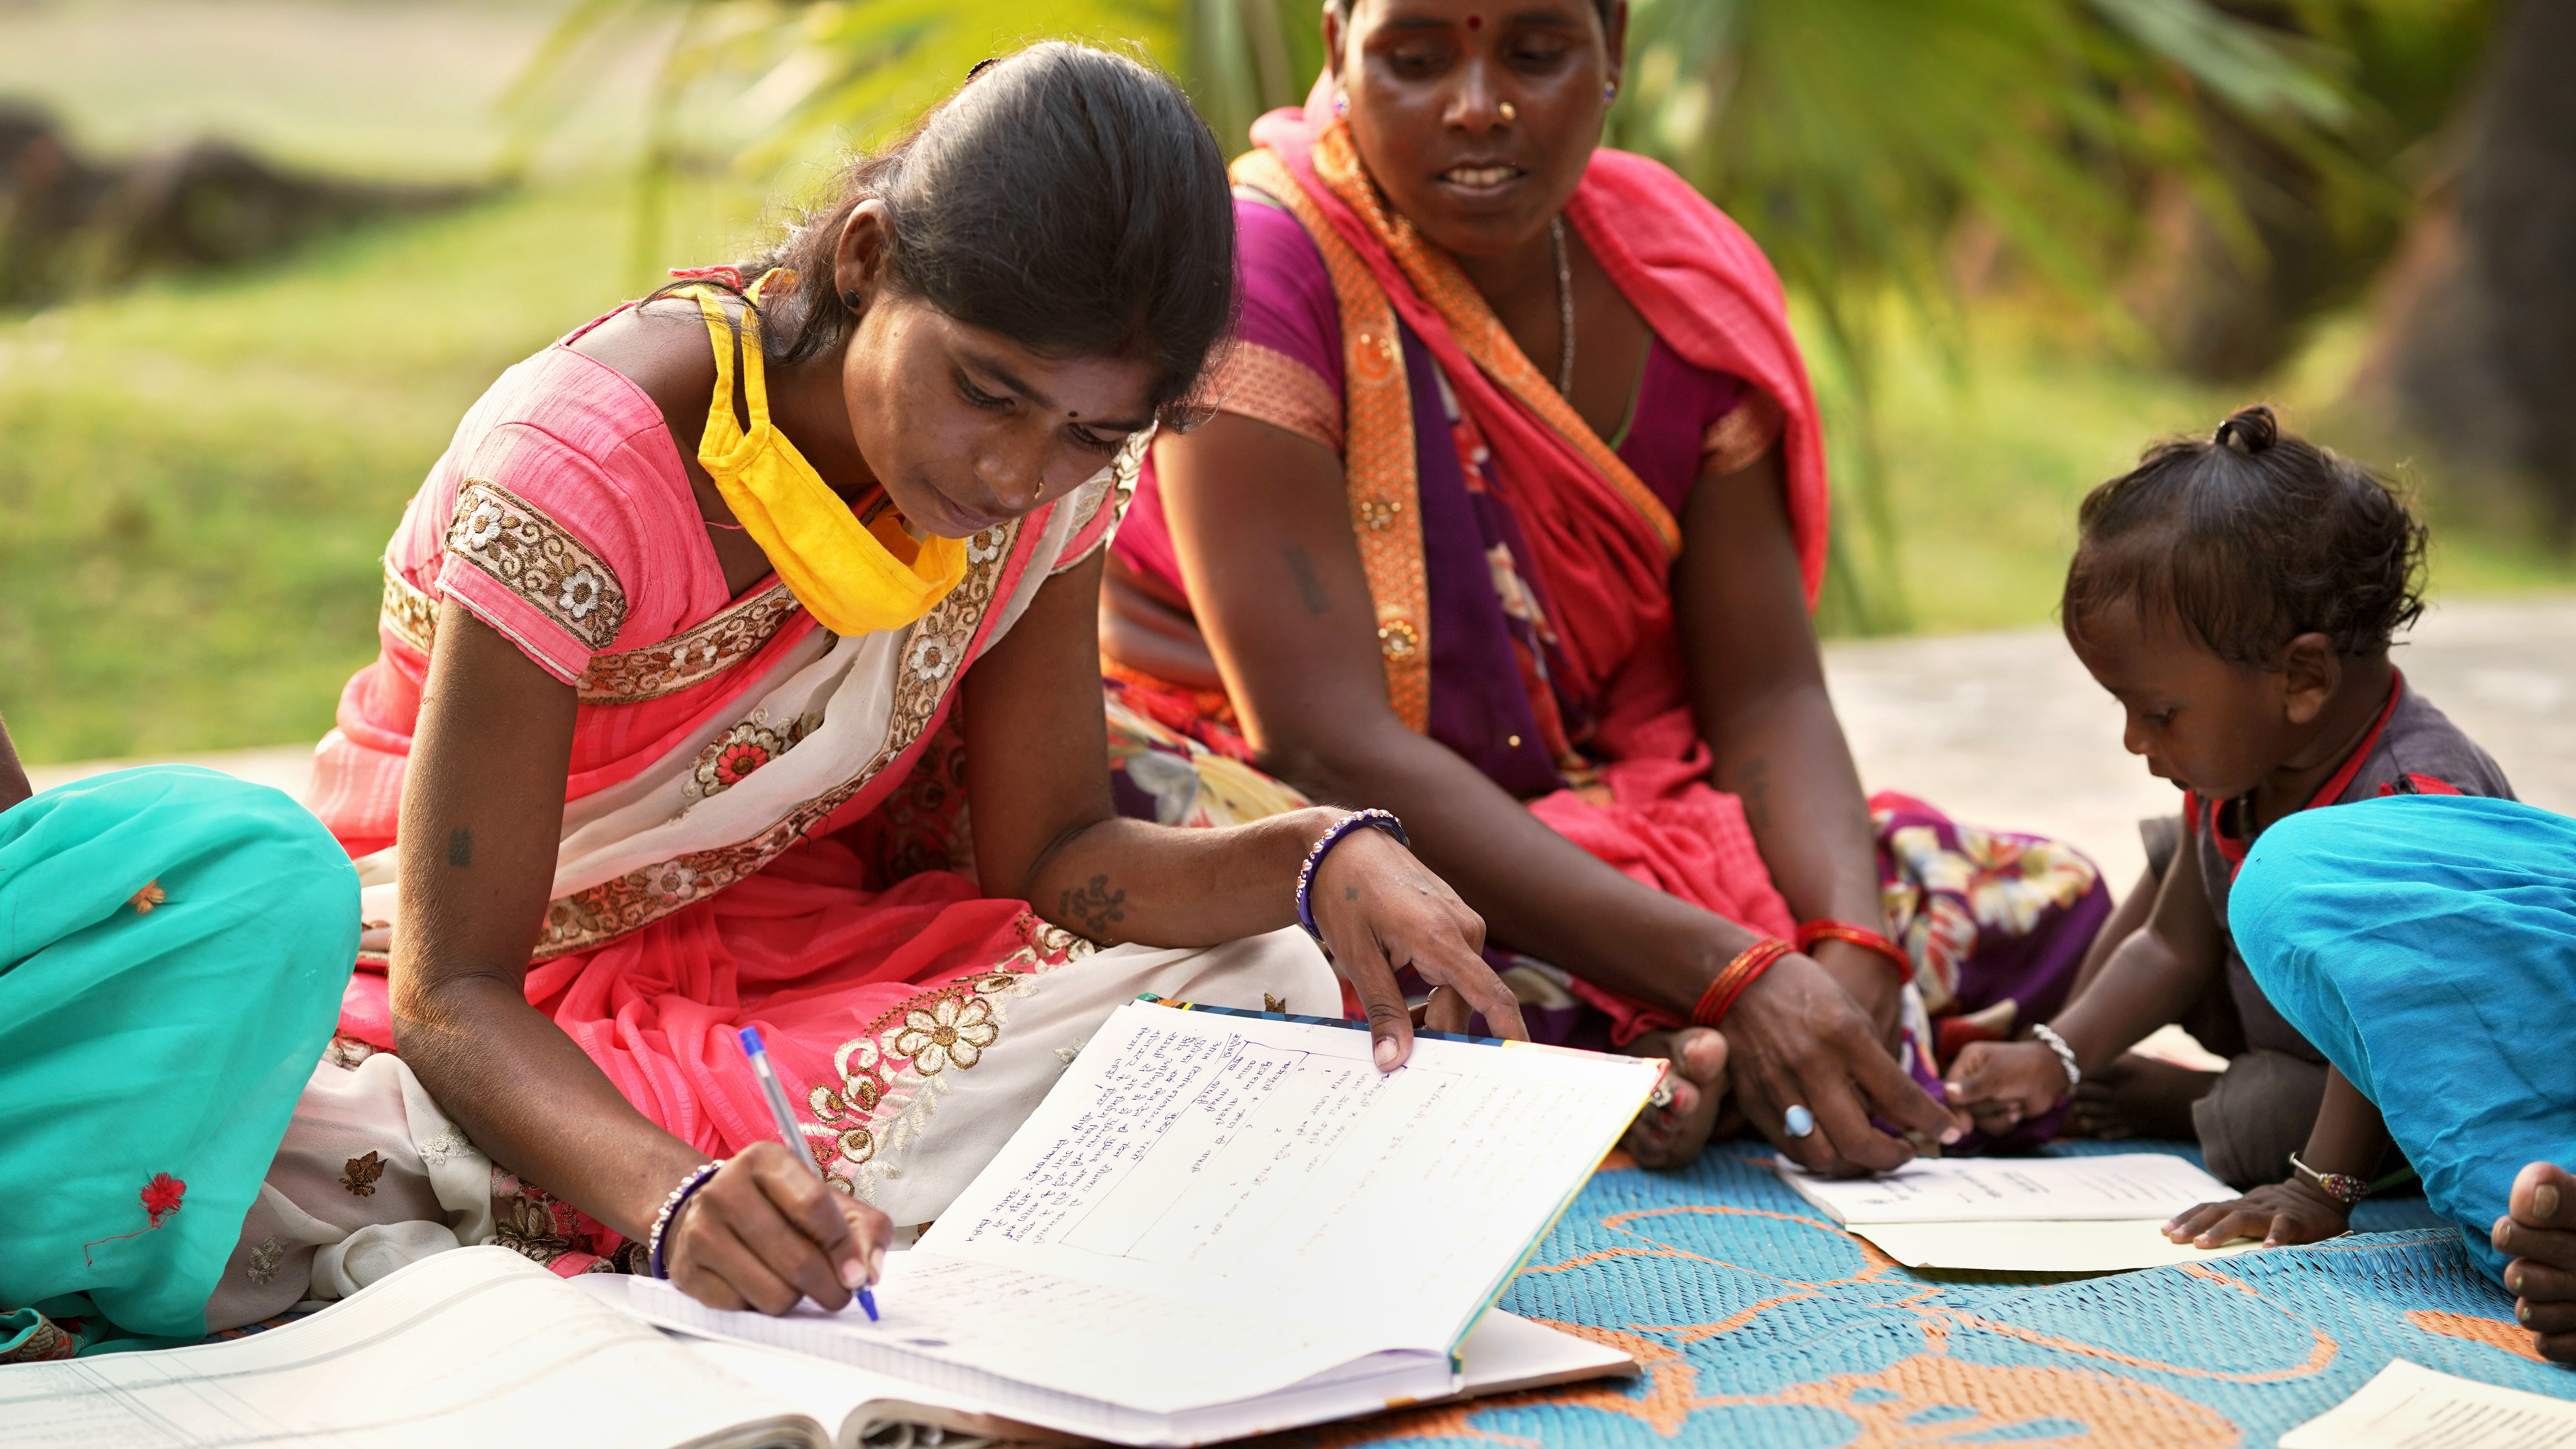 Adult literacy programs in India have not reached all adults in need. : UN Women CC 2.0